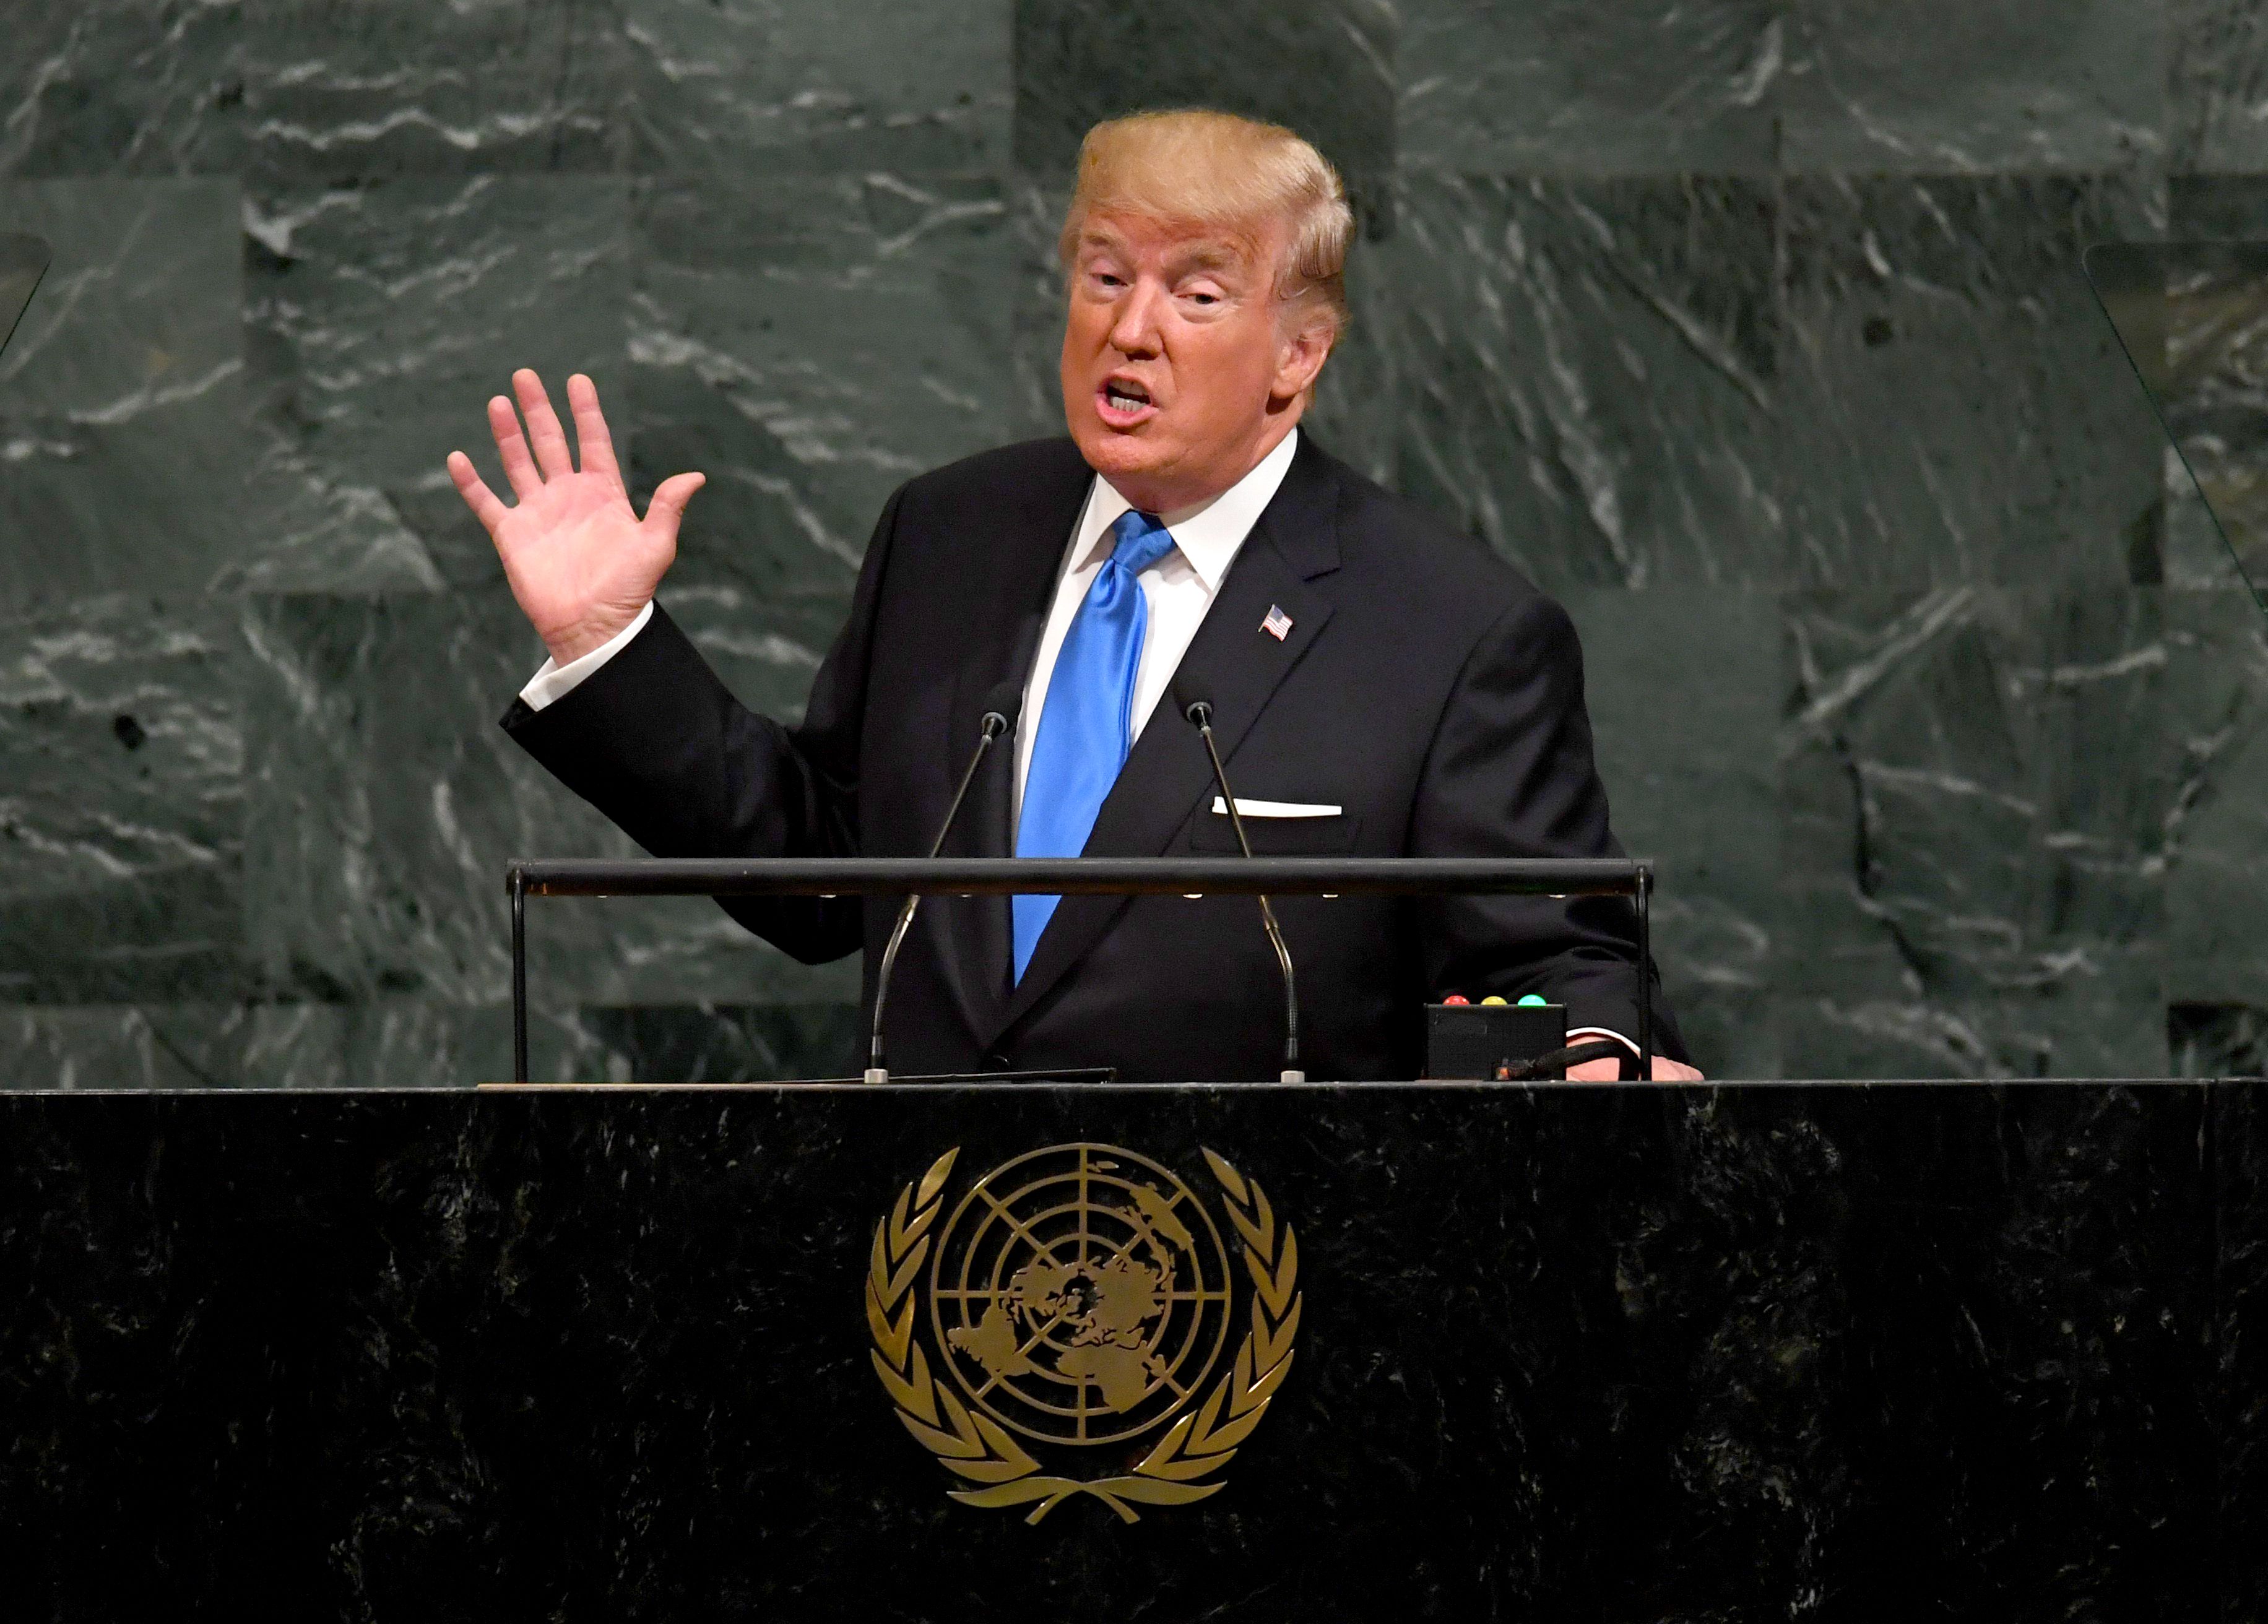 President Trump speaks to the UN General Assembly